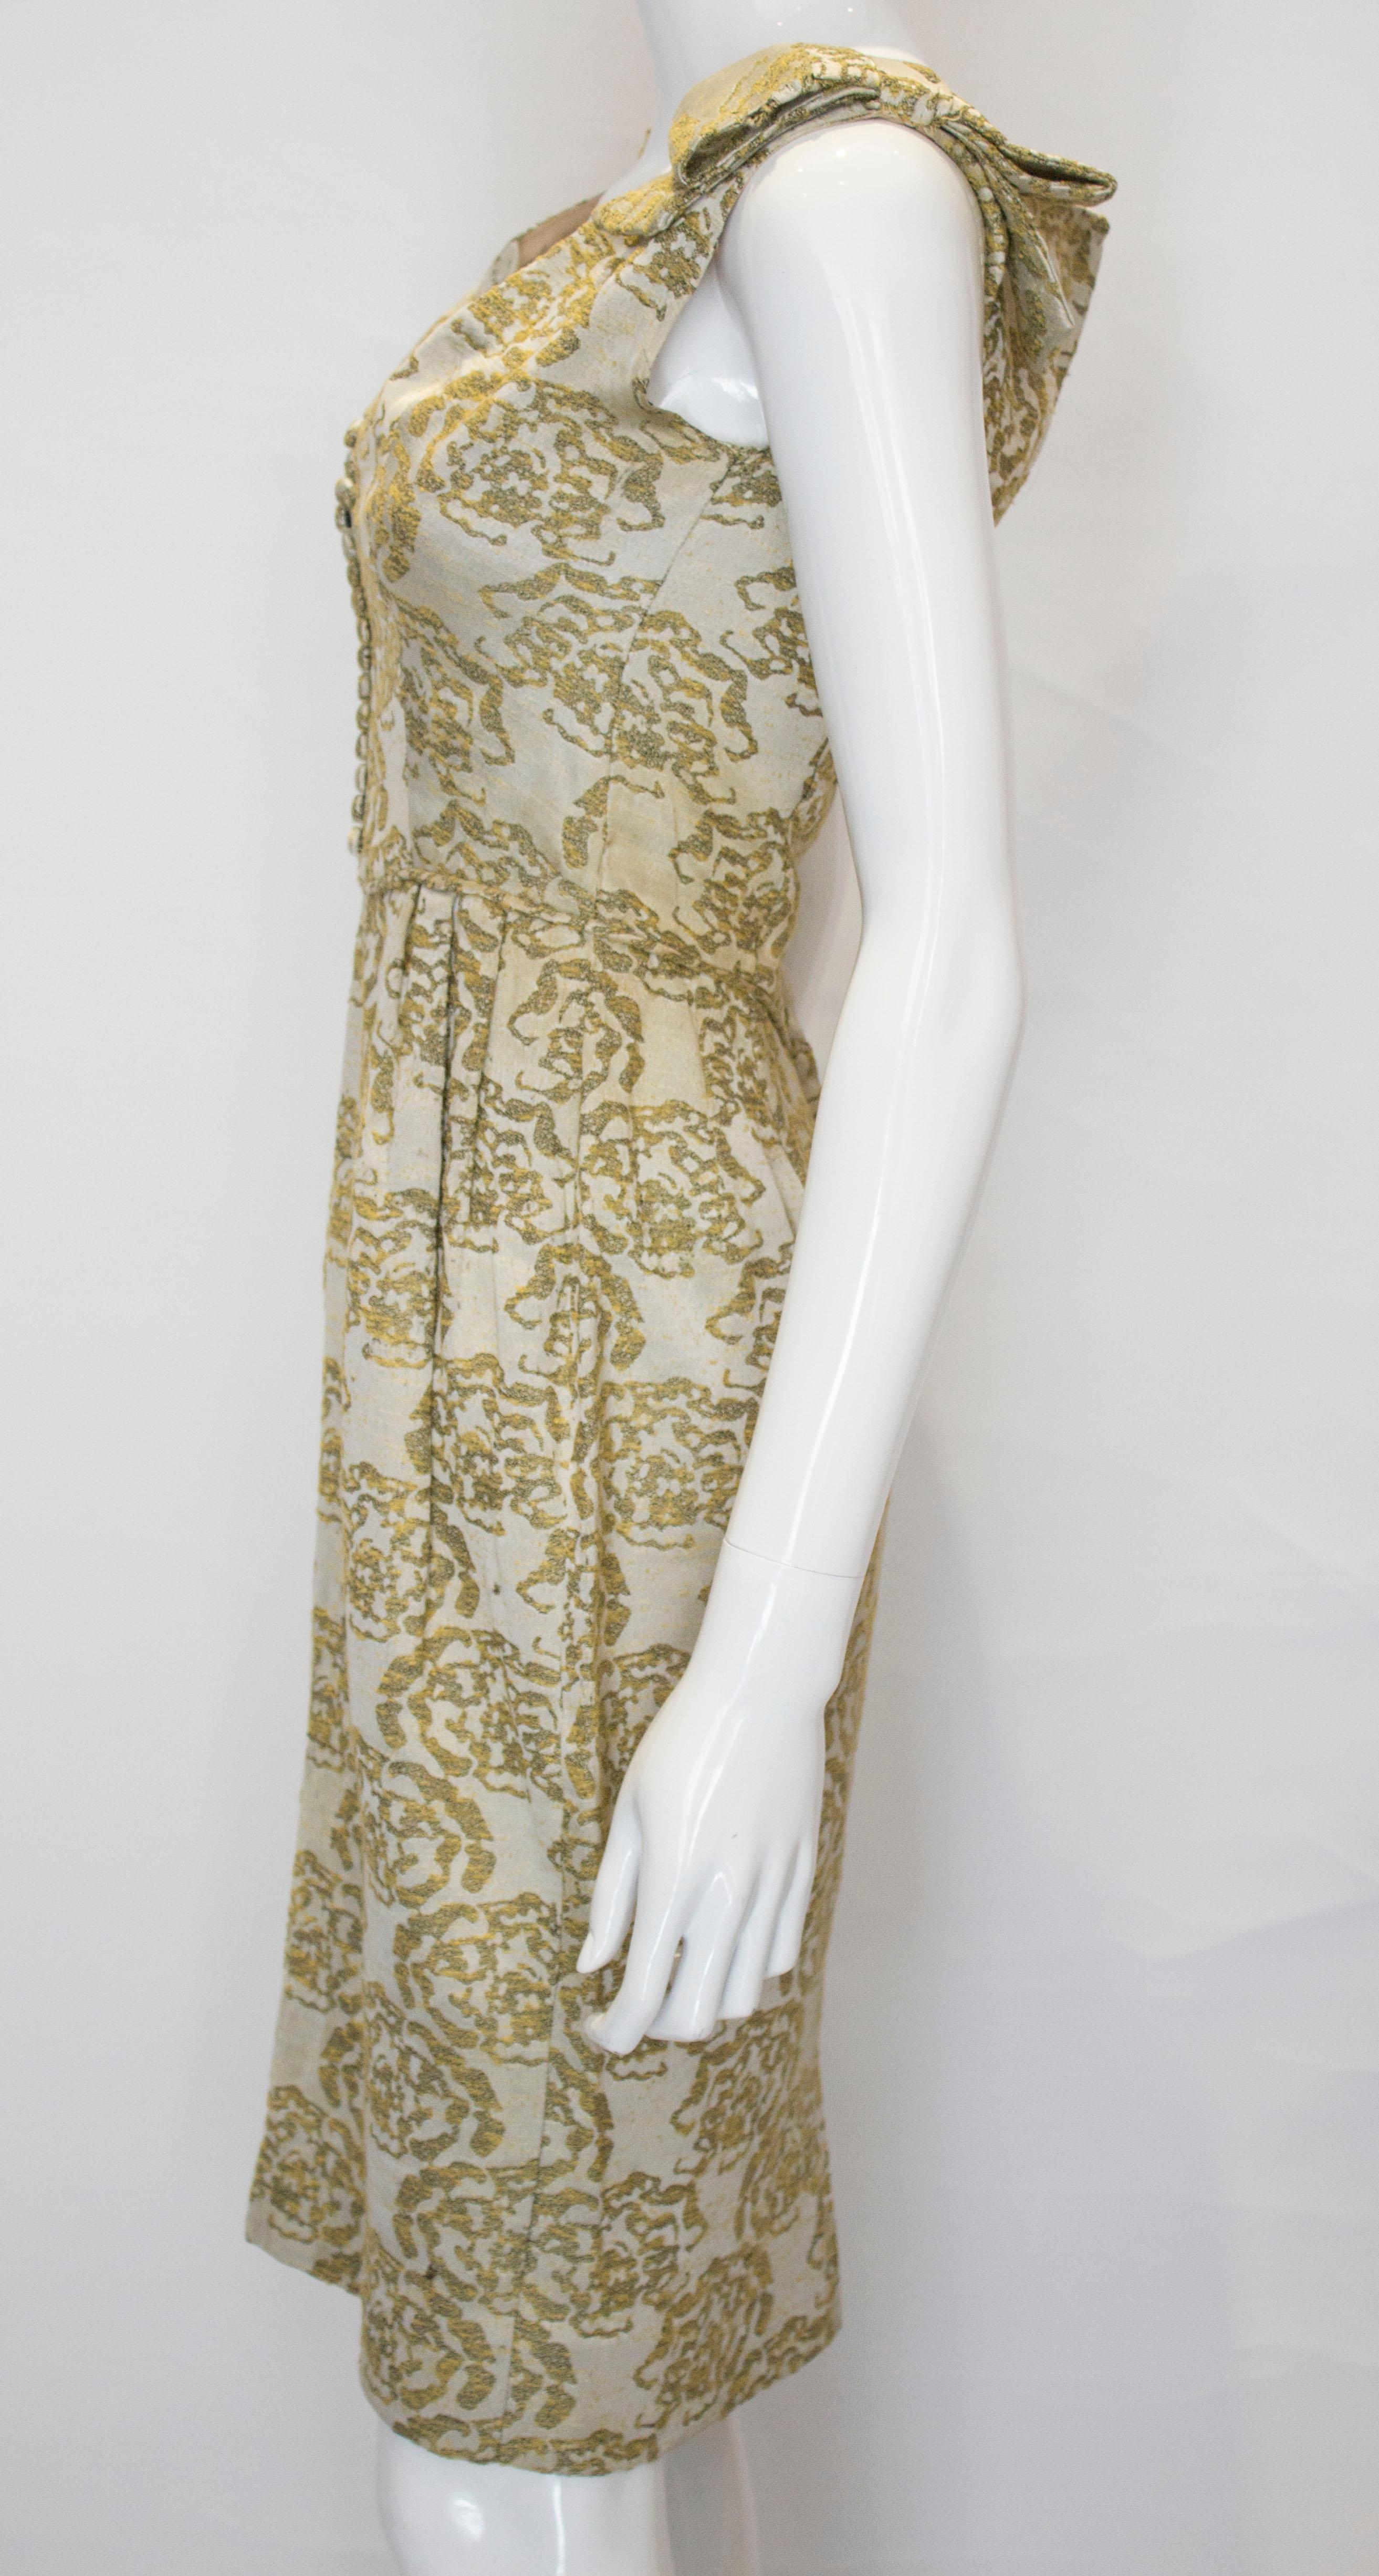 Women's A vintage 1950s - 1960s olive green & gold brocade cinch wiggle cocktail dress 